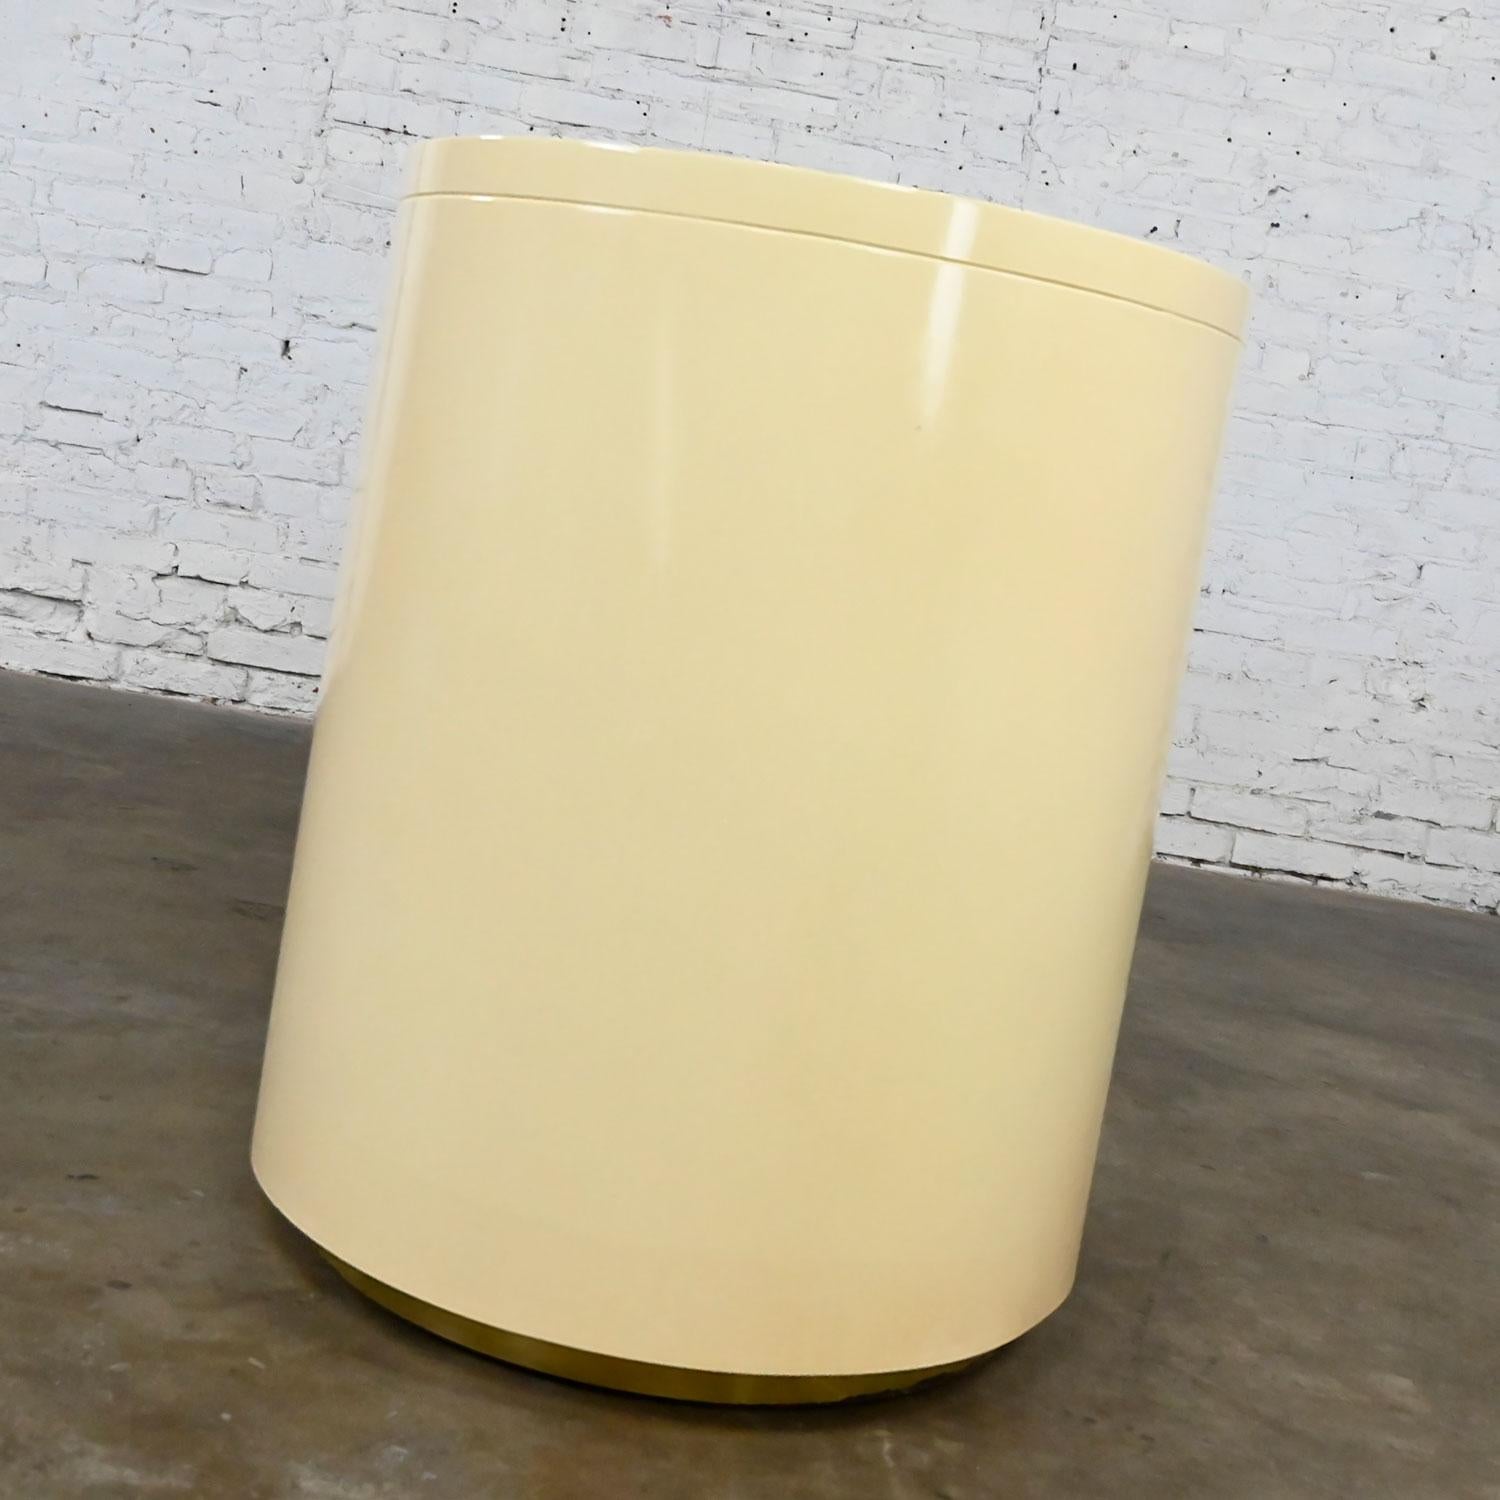 20th Century Modern off White Lacquered Desk Brass Details Style of Baughman or Springer For Sale